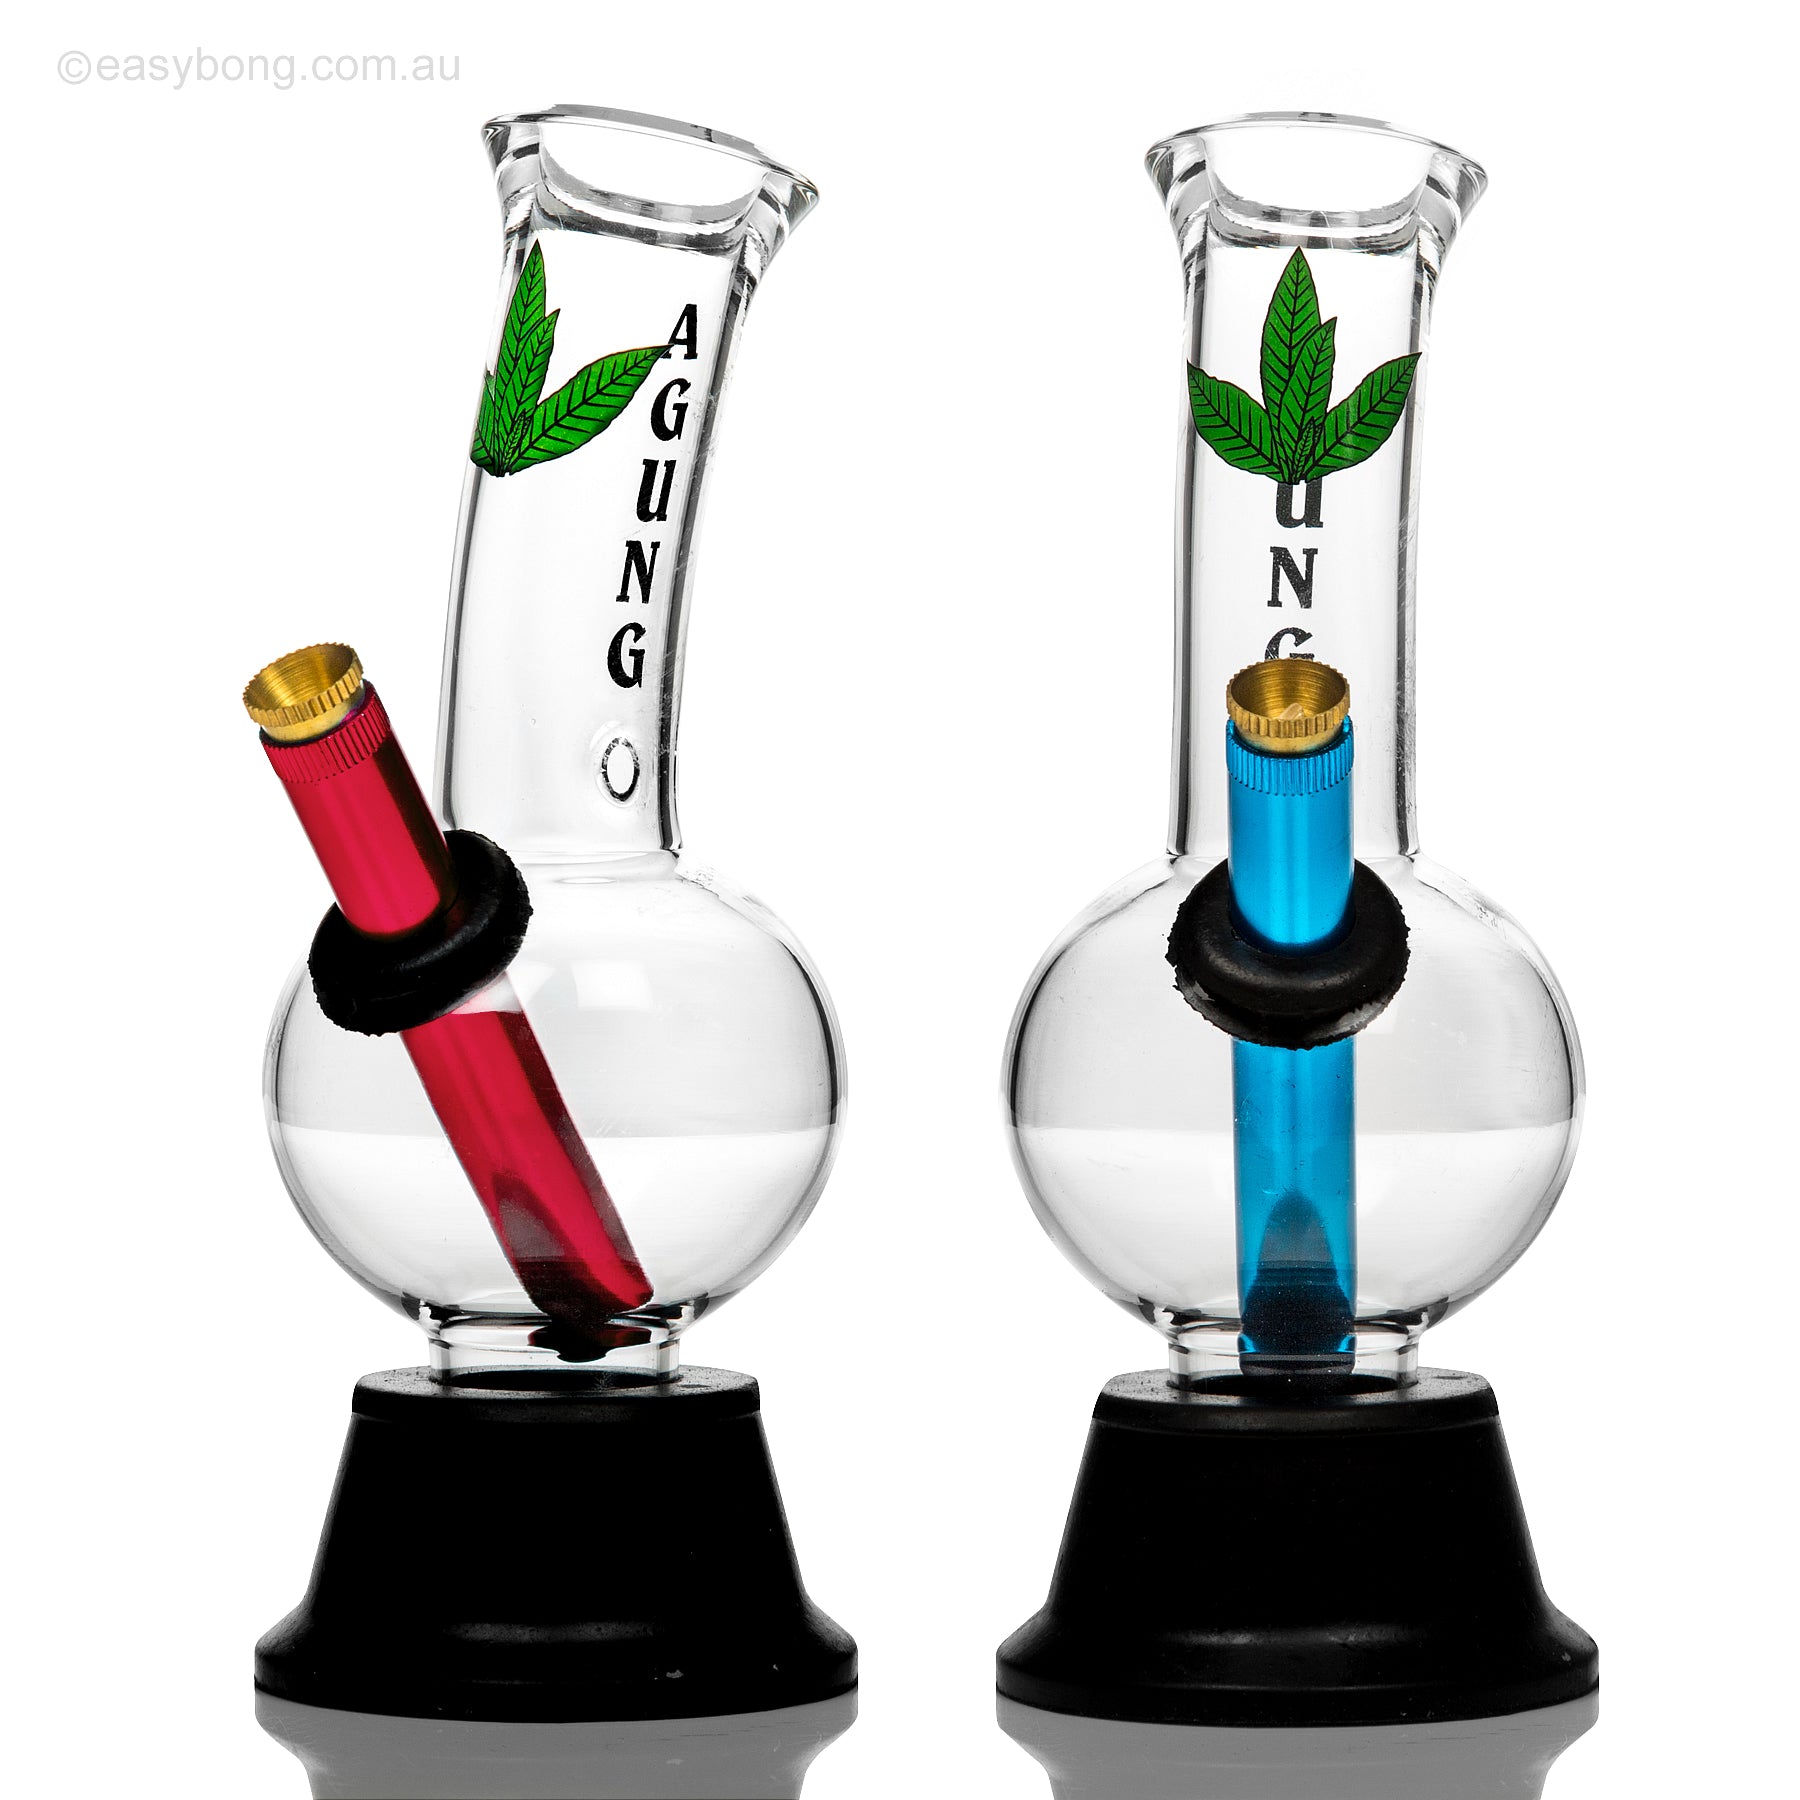 Agung 1177 stumpy leaf bong with cannabis leaf decal and removable rubber base for cleaning.